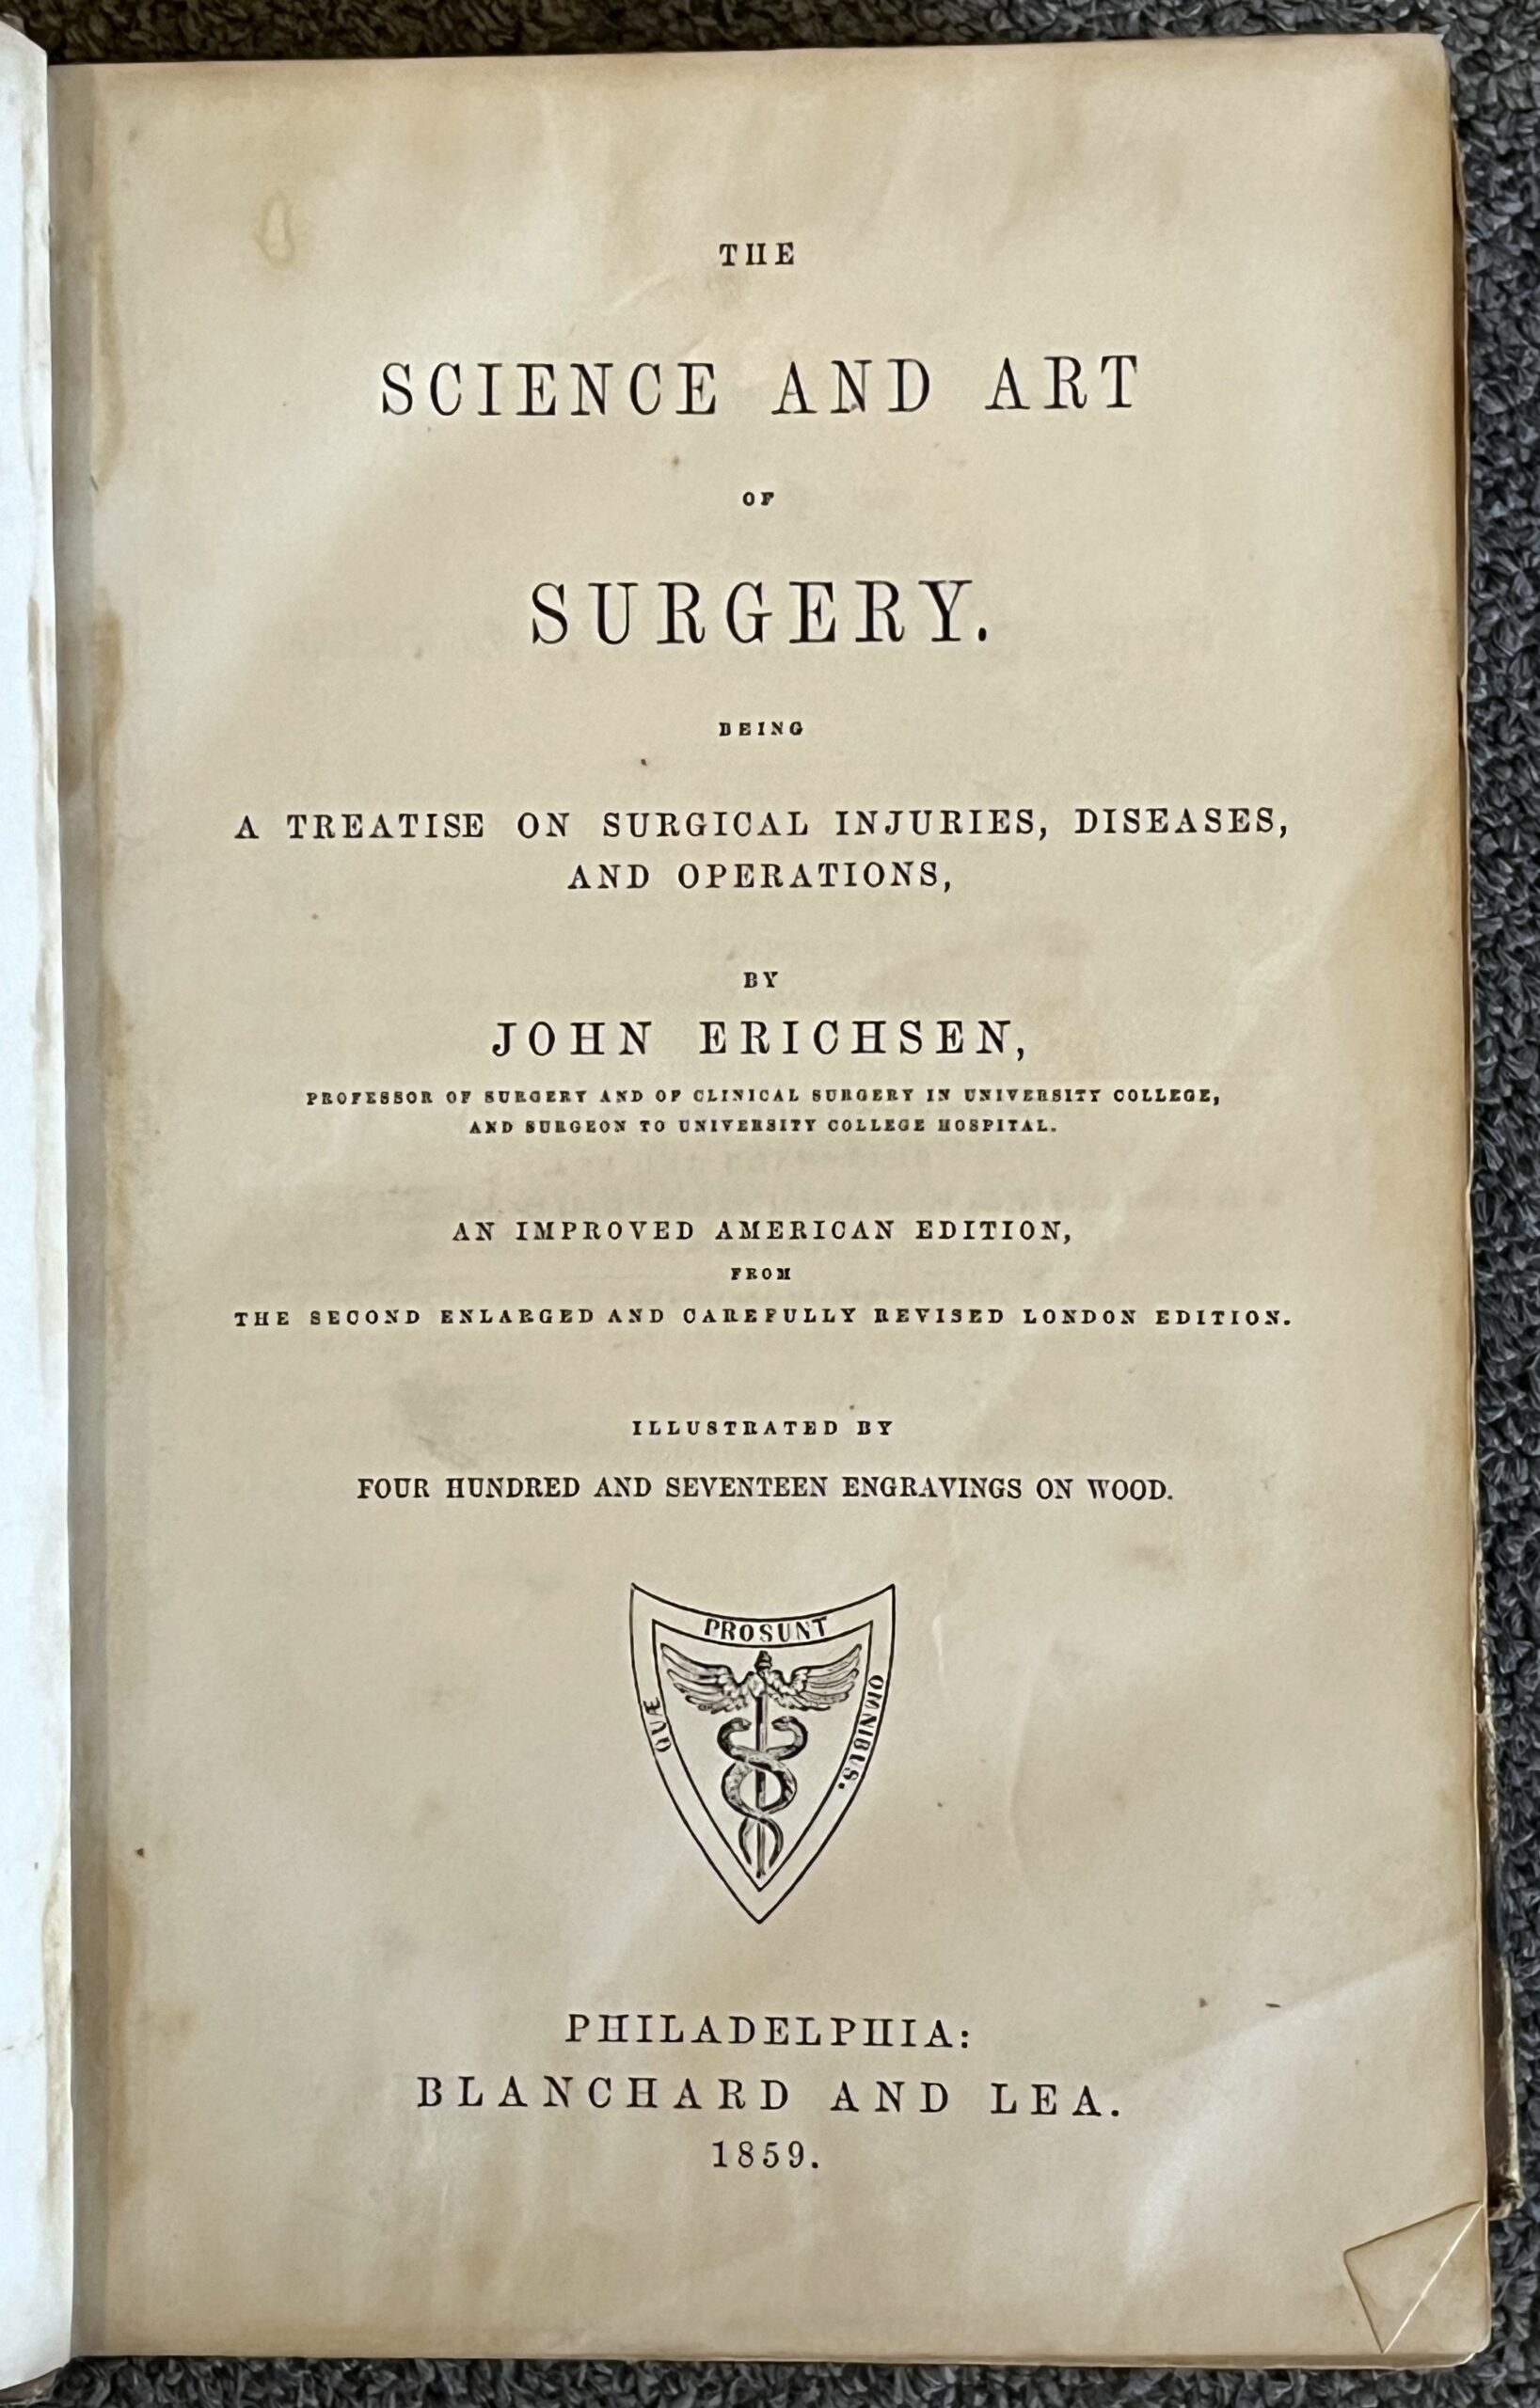 The Science and Art of Surgery – Erichsen (1884)